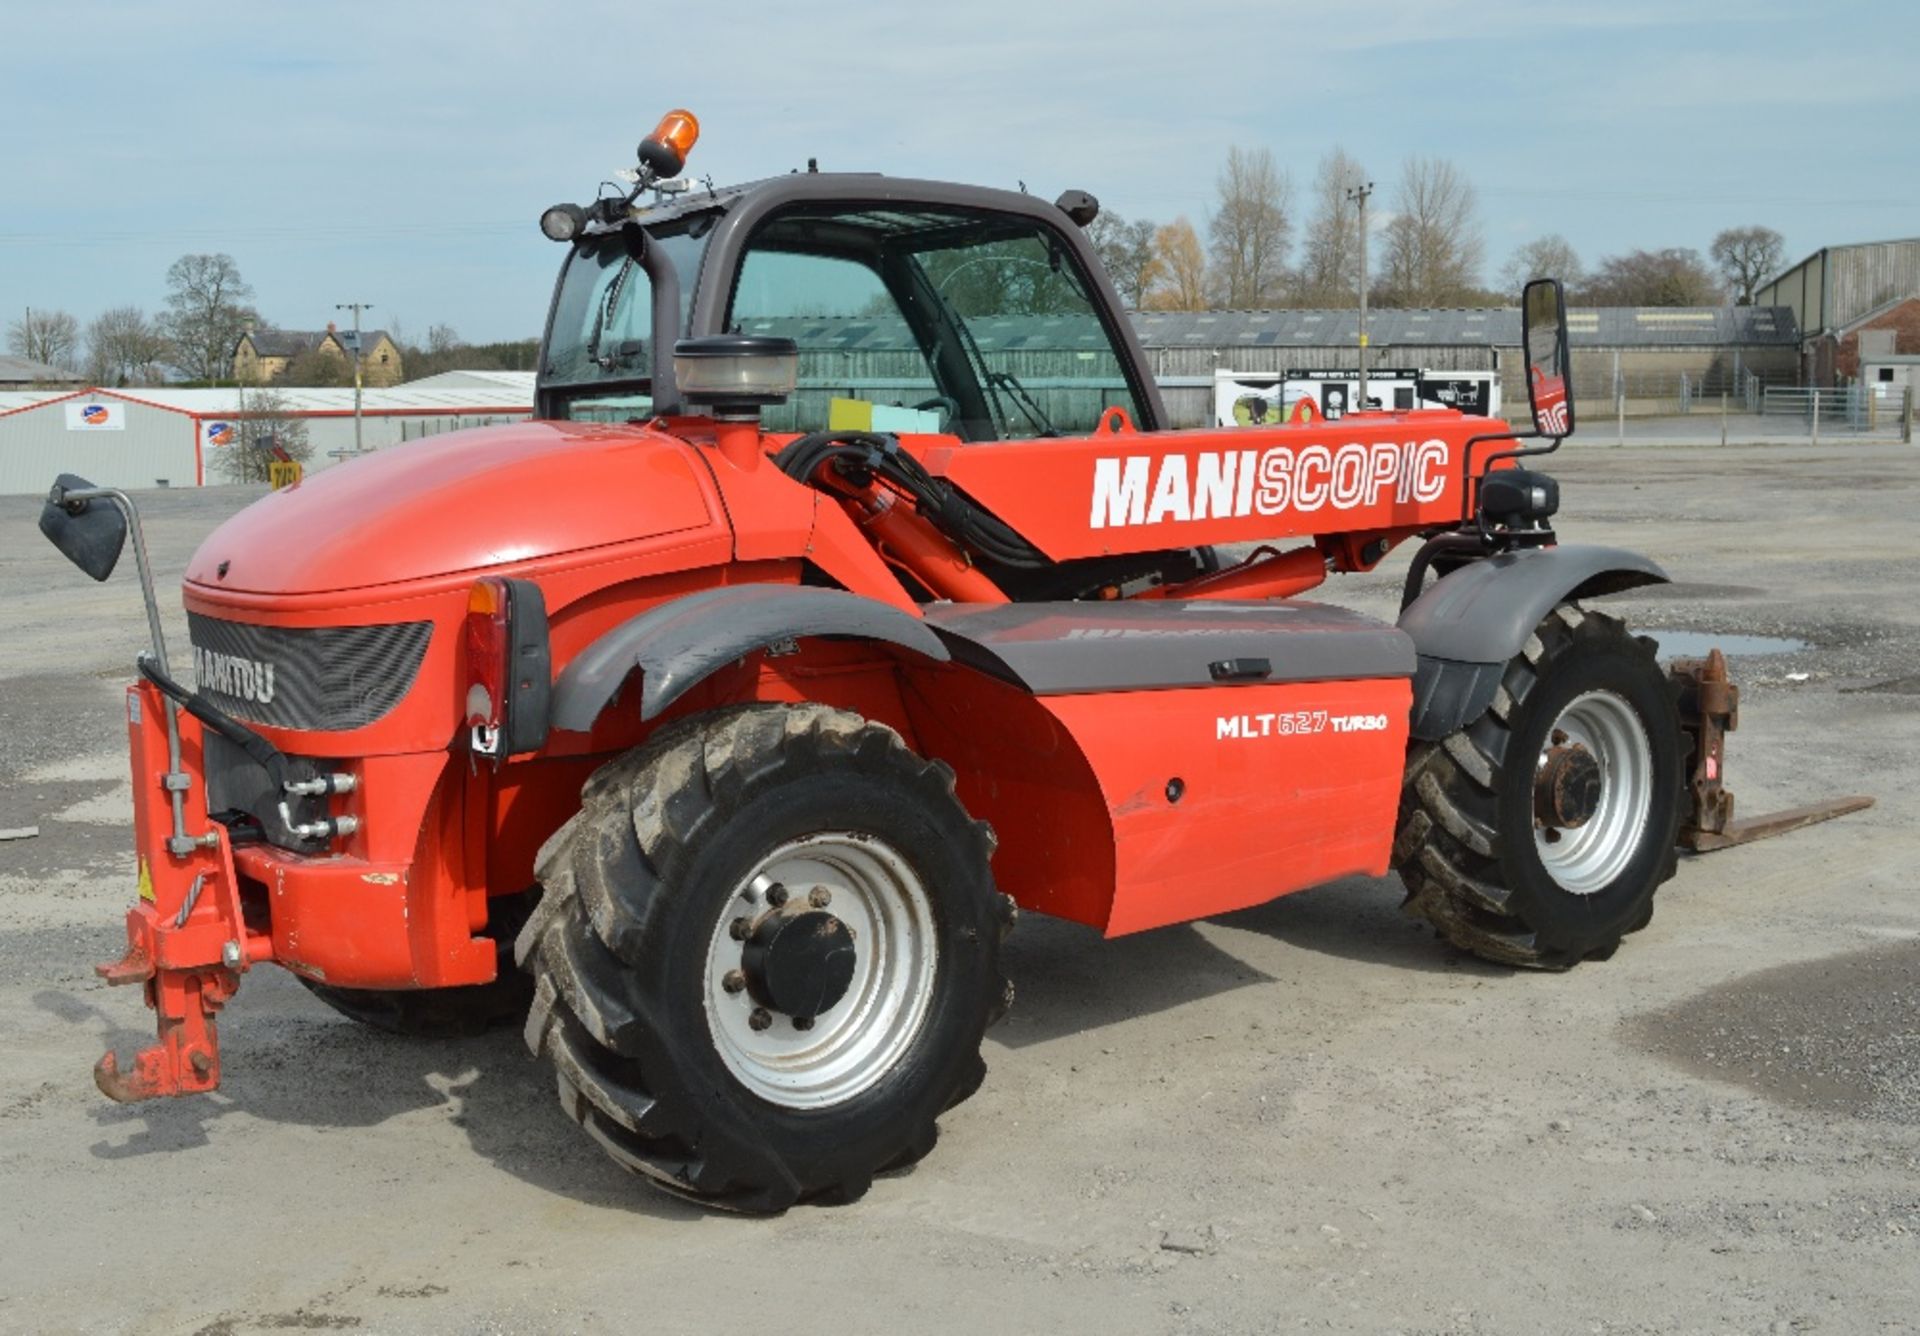 Manitou MLT 627 Turbo 6 metre telescopic handler
Year: 2011
S/N: 904615
Recorded hours: 3600 - Image 4 of 12